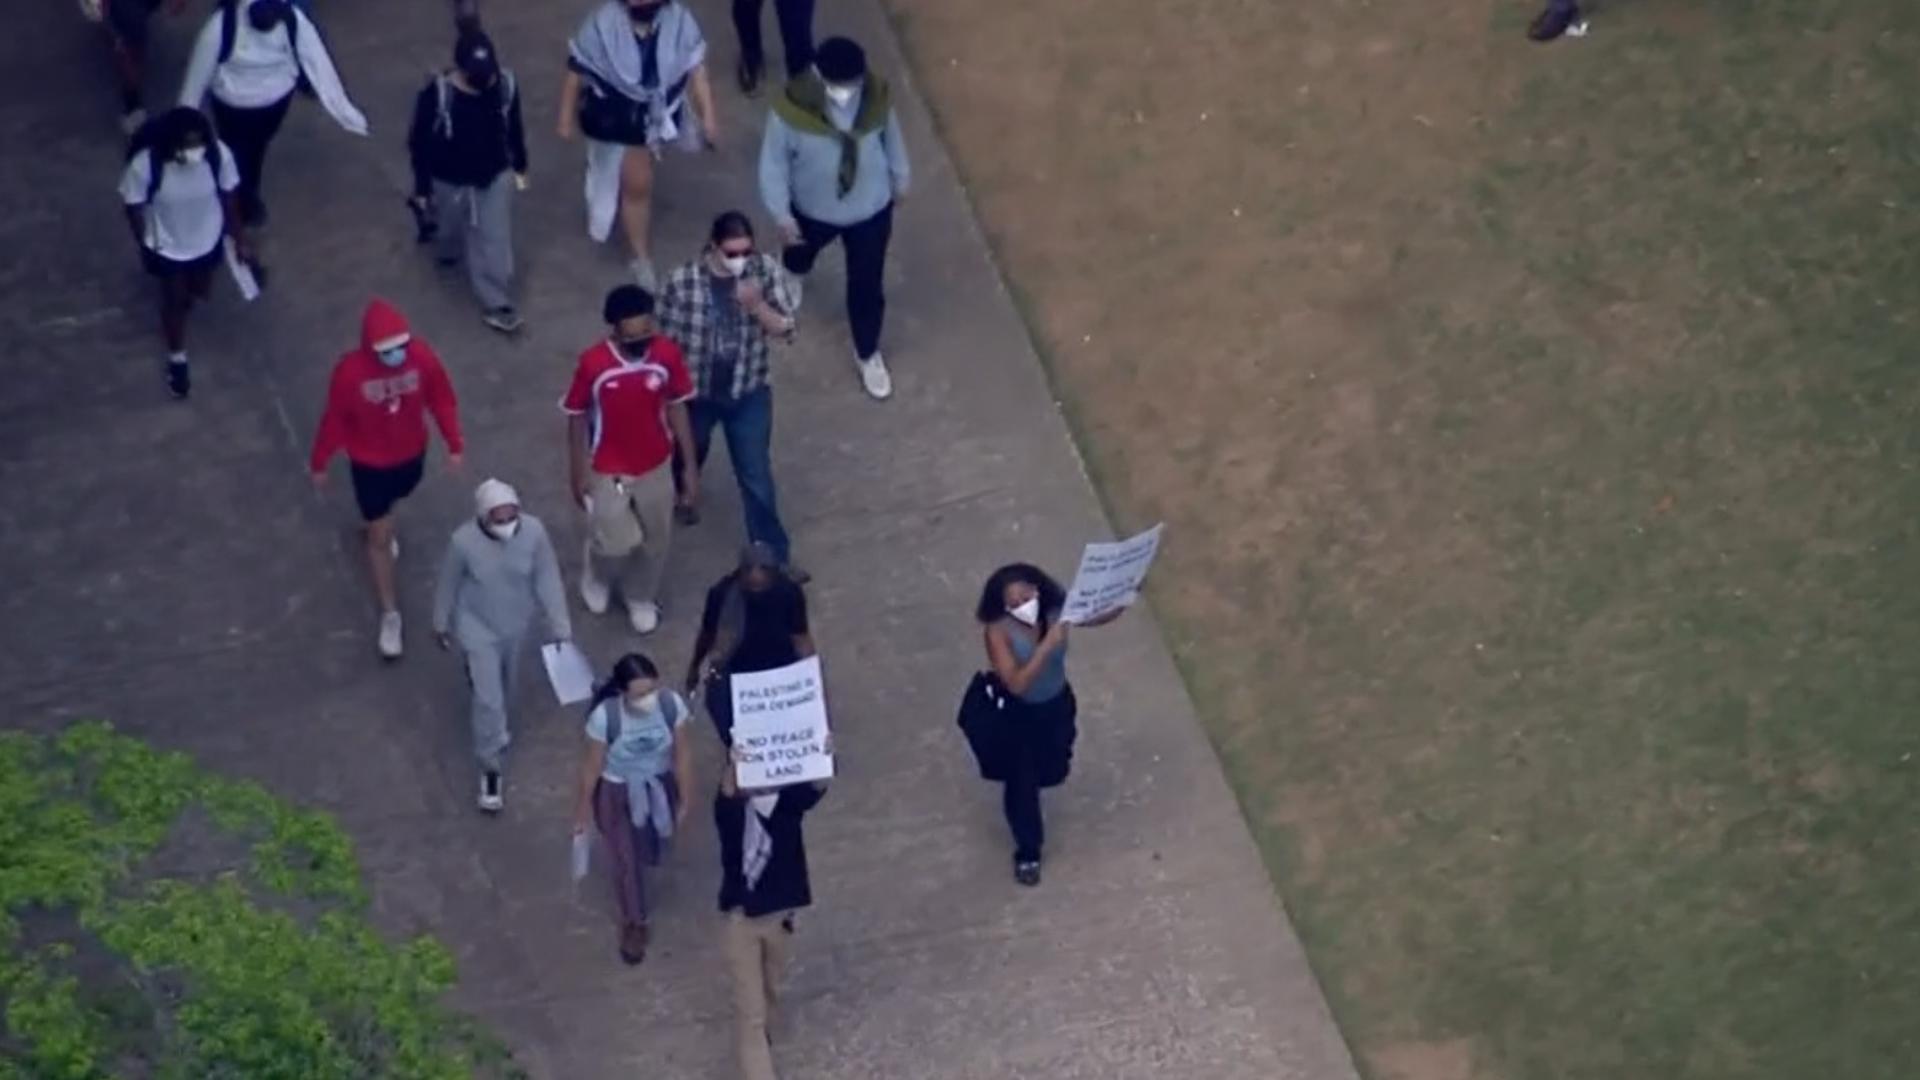 11Alive SkyTracker flew over a group of protesters at the University of Georgia campus in Athens on Monday afternoon.